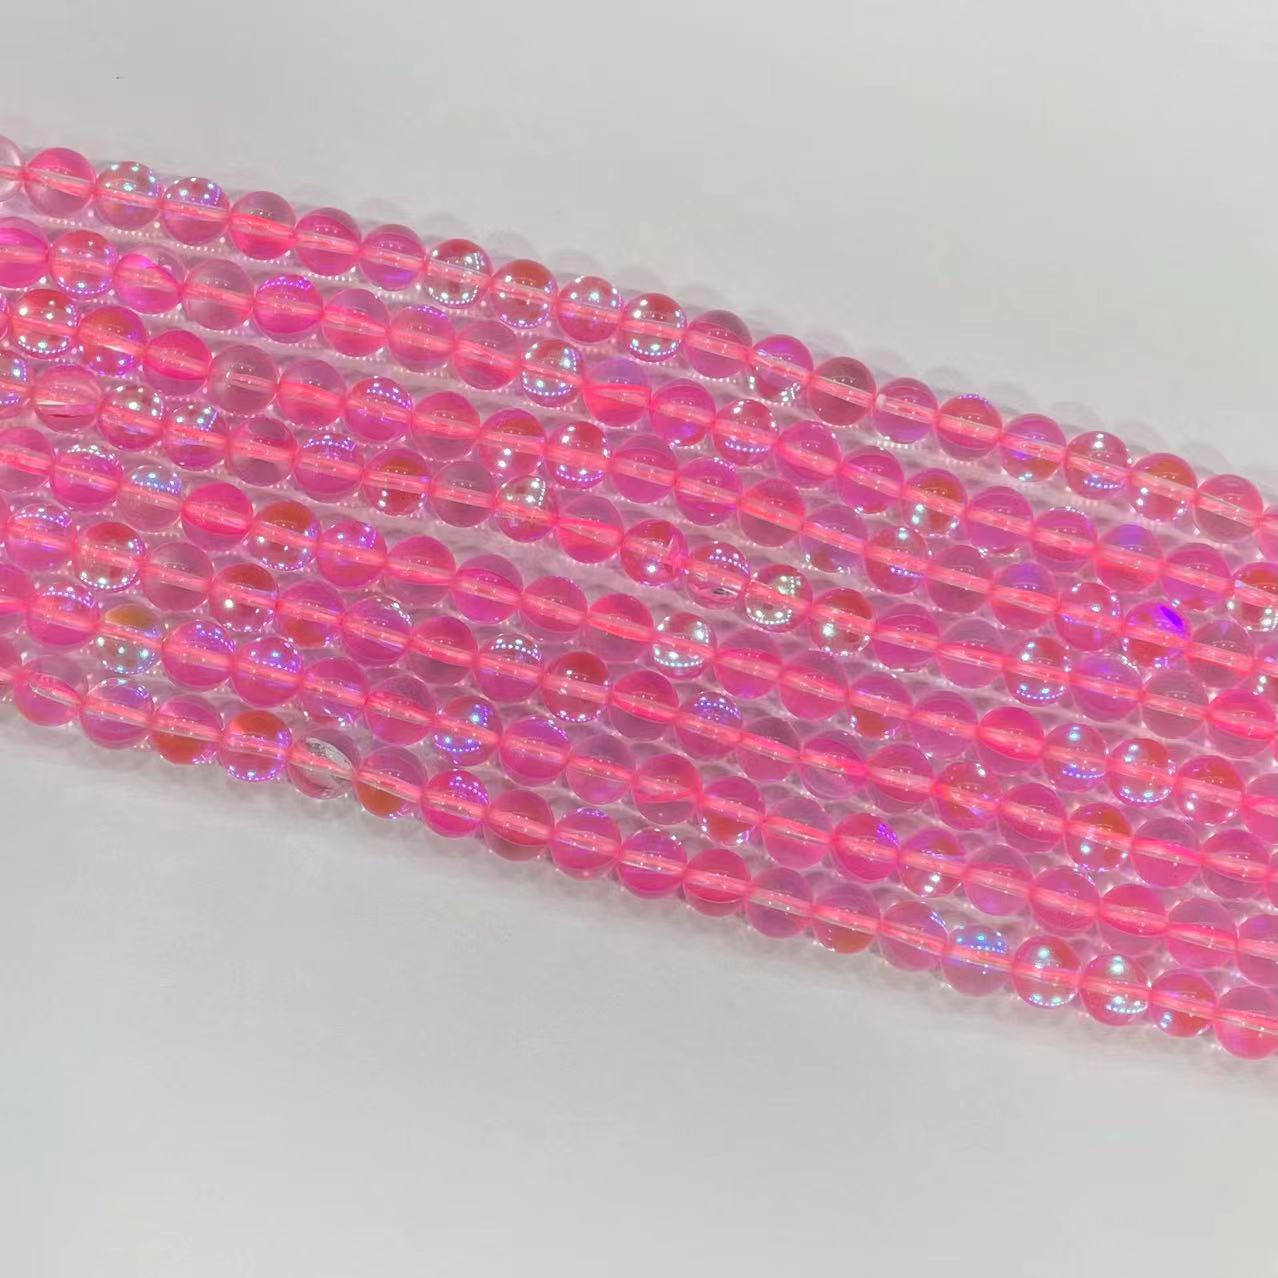 Natural Glass Beads Wholesale  American Bead Corp Tagged Pink